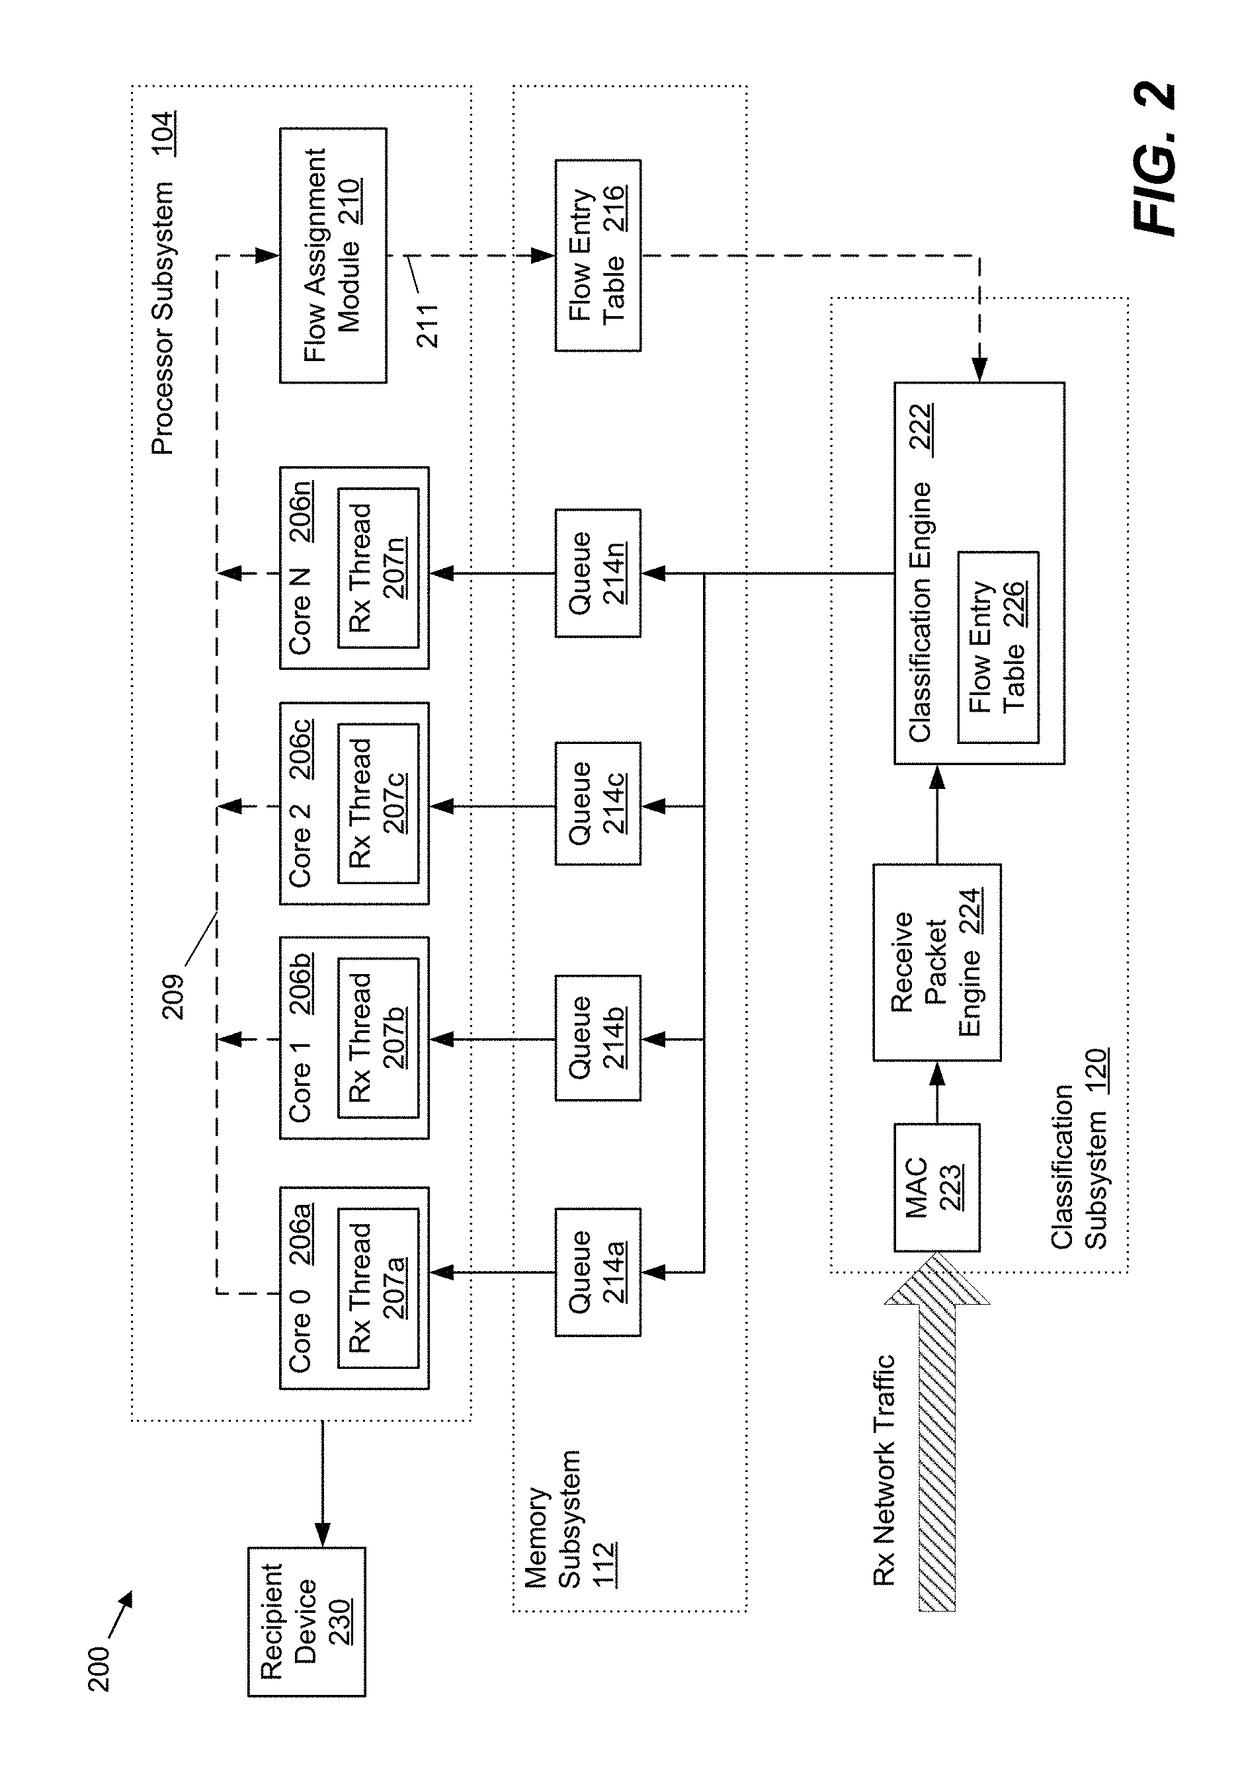 Method and system for providing efficient receive network traffic distribution that balances the load in multi-core processor systems